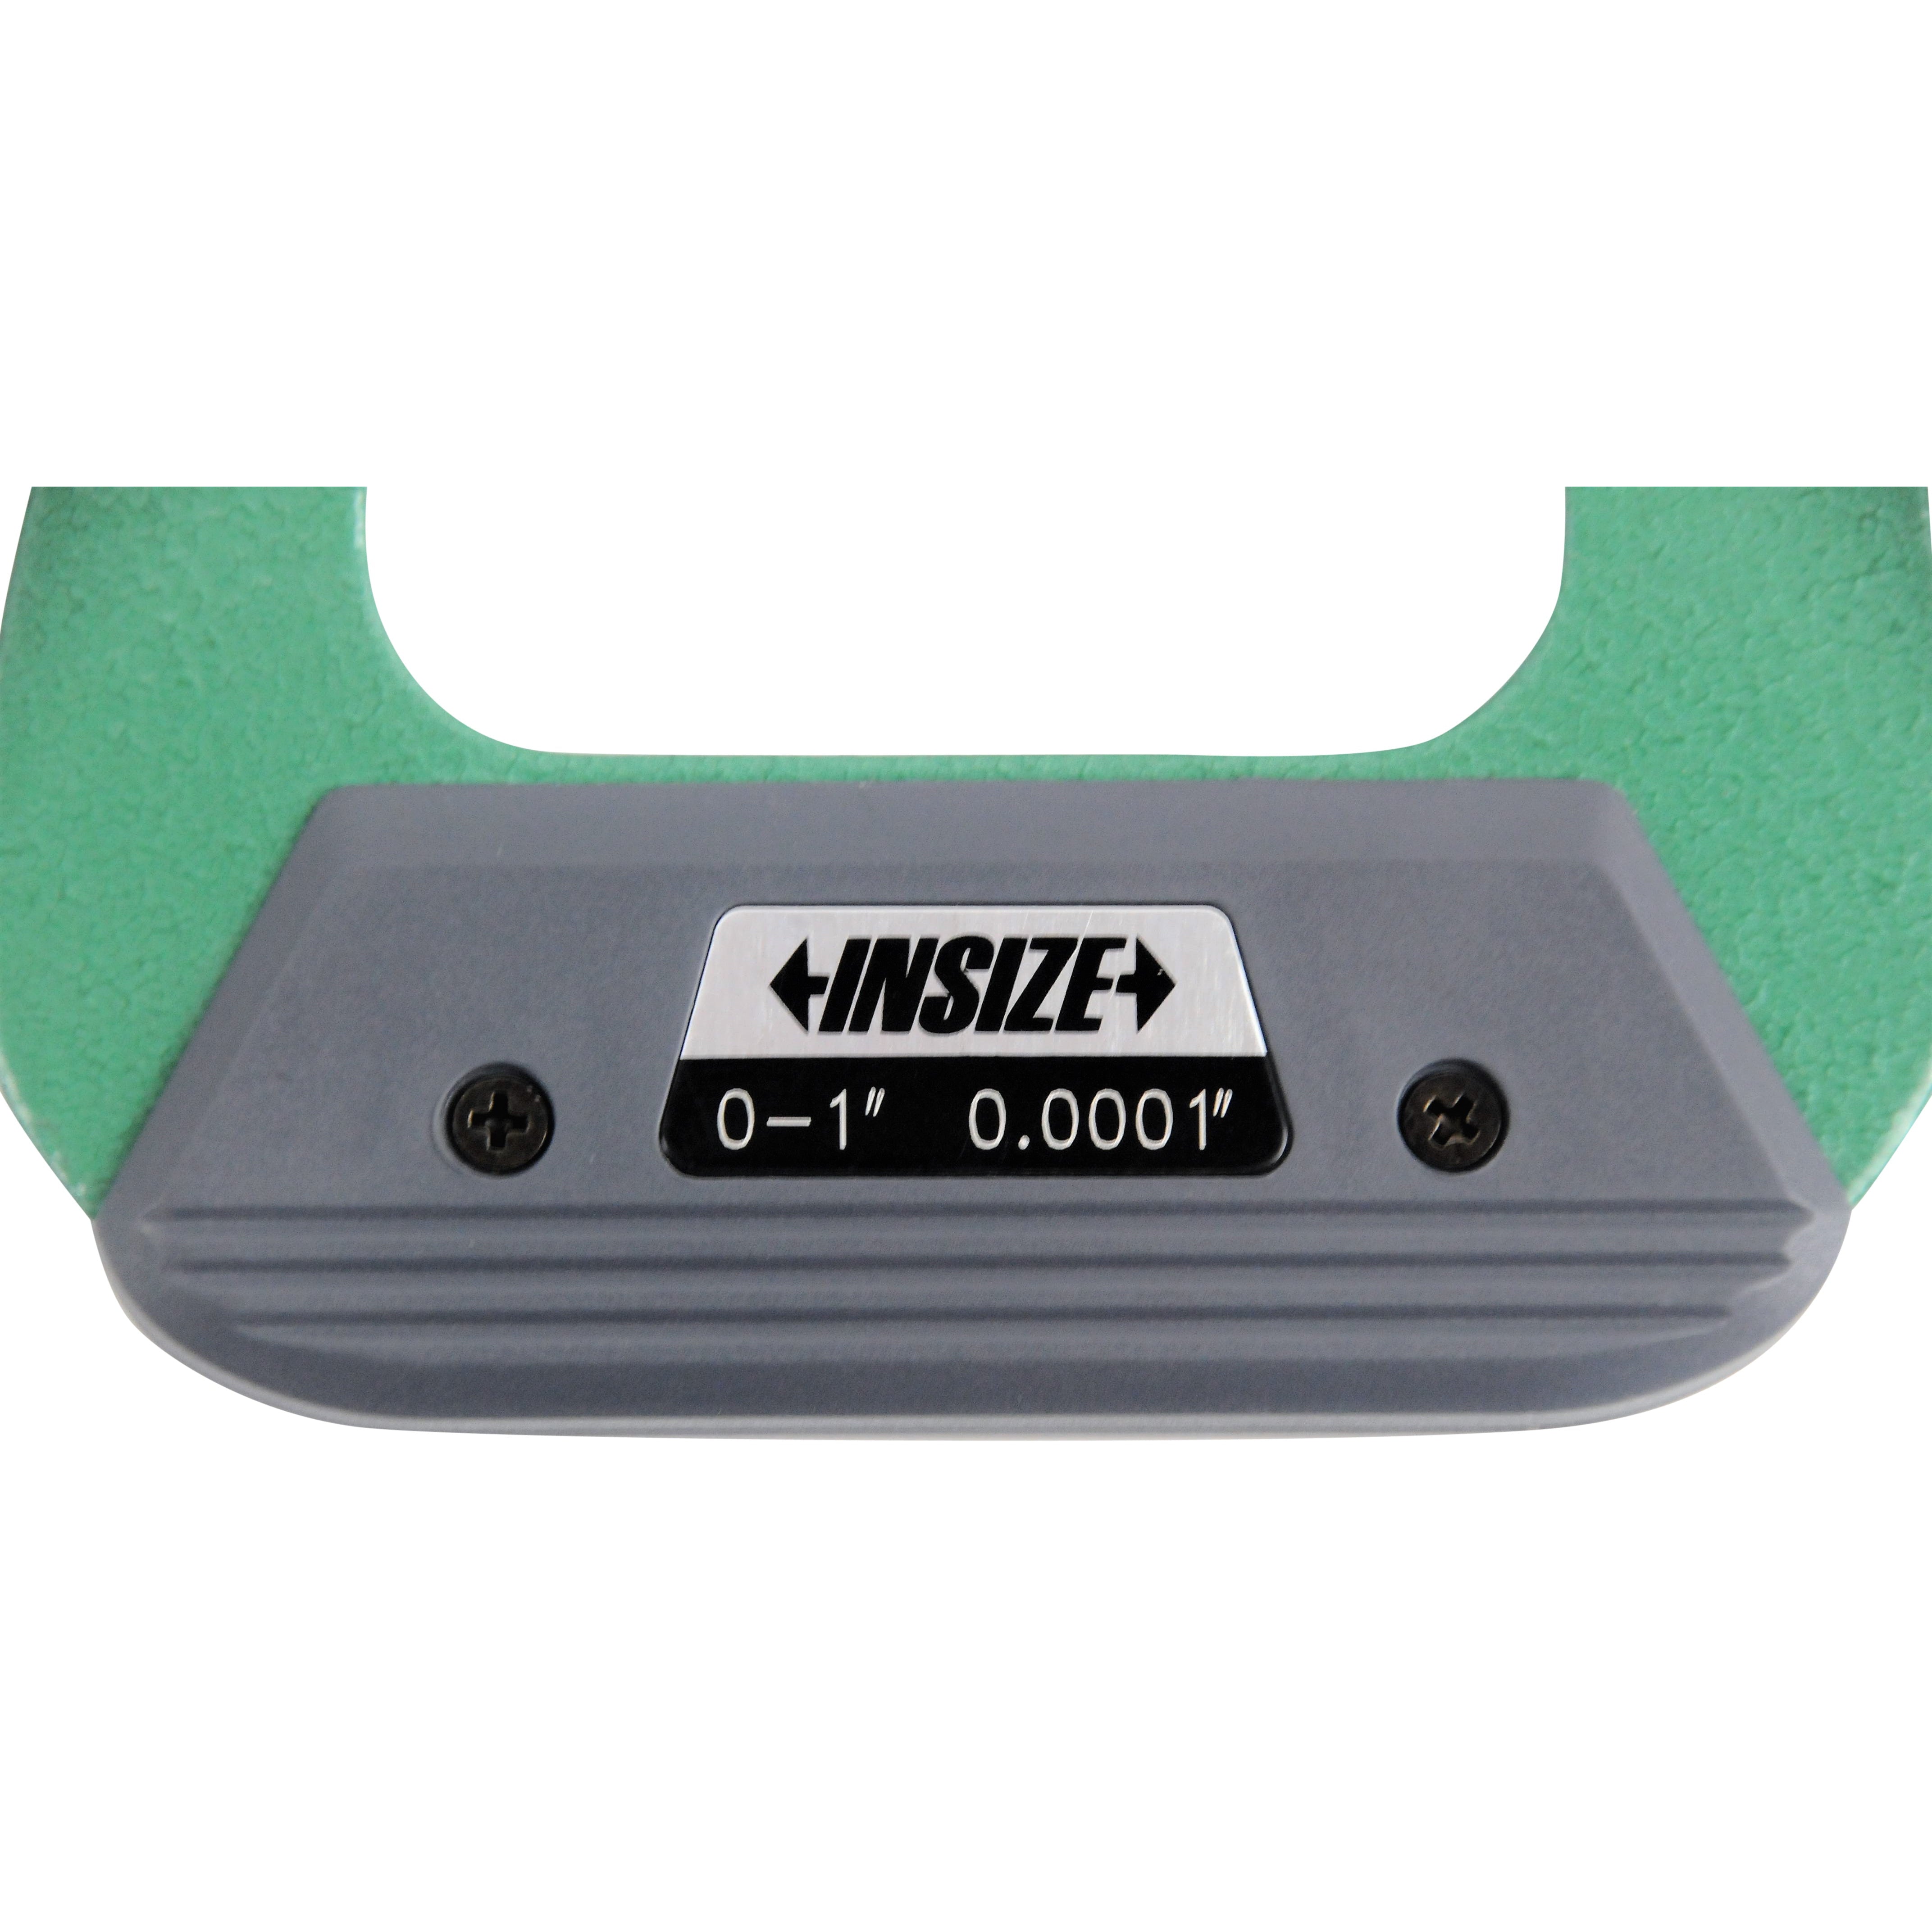 Insize Imperial Outside Blade Micrometer 0-1" Range Series 3232-1